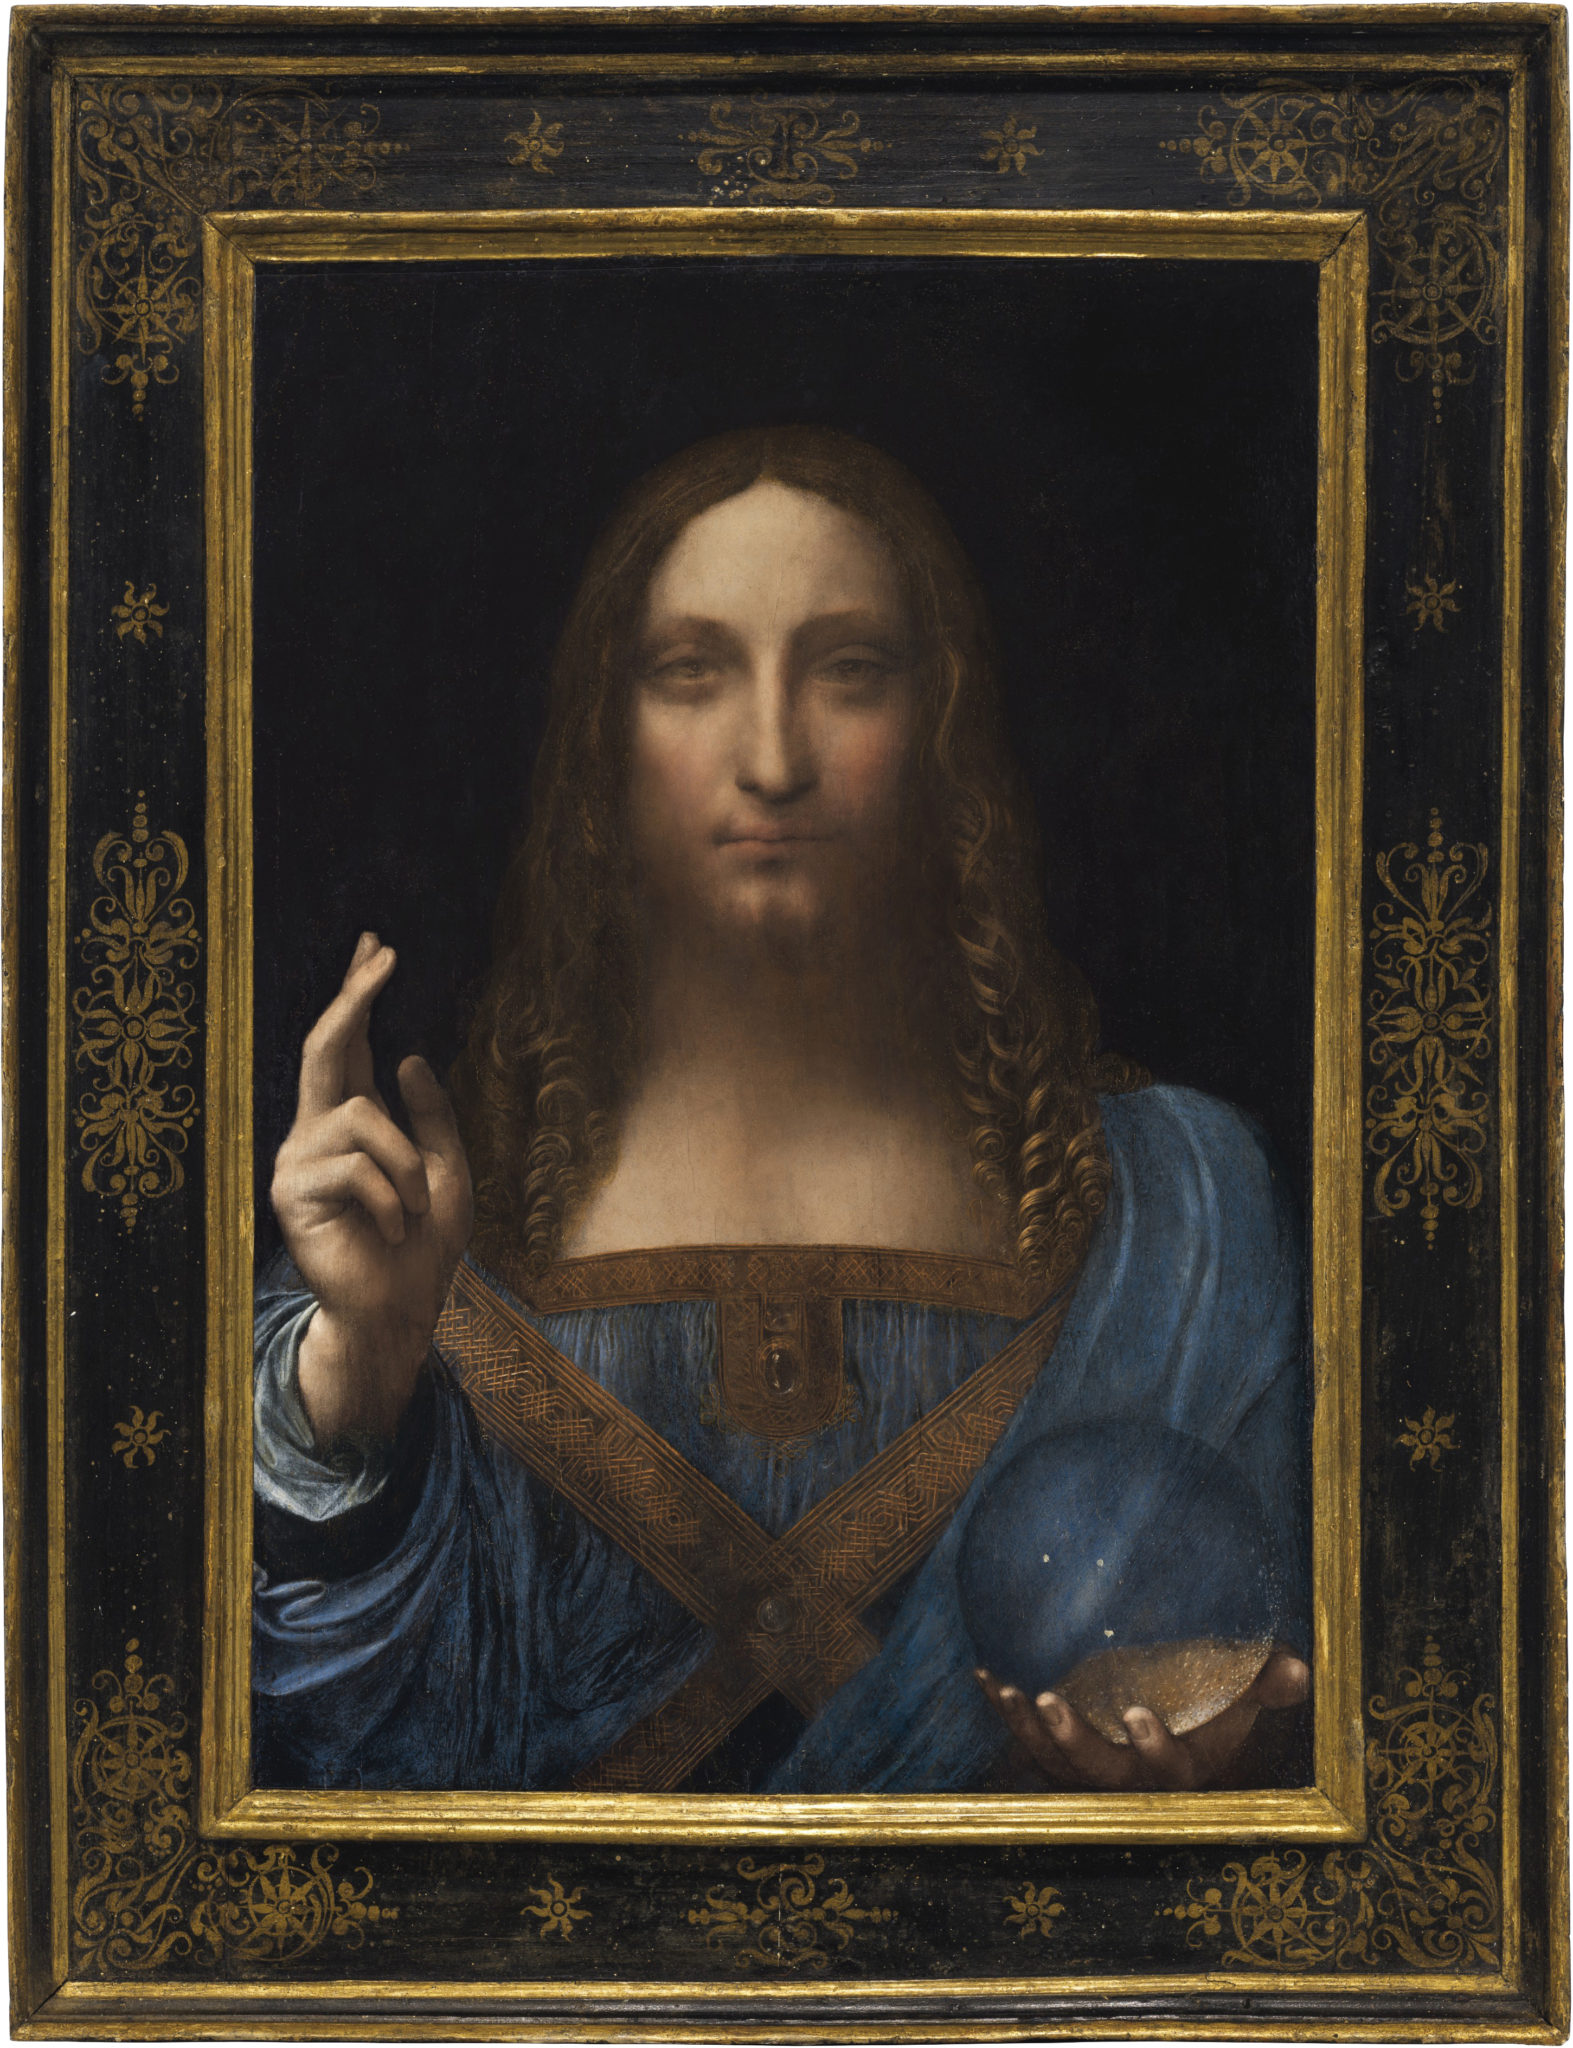 The Salvator Mundi by Leonardo Da Vinci, the most expensive painting of all time - a depiction on appraising and valuing fine art for pawnbroking purpuses